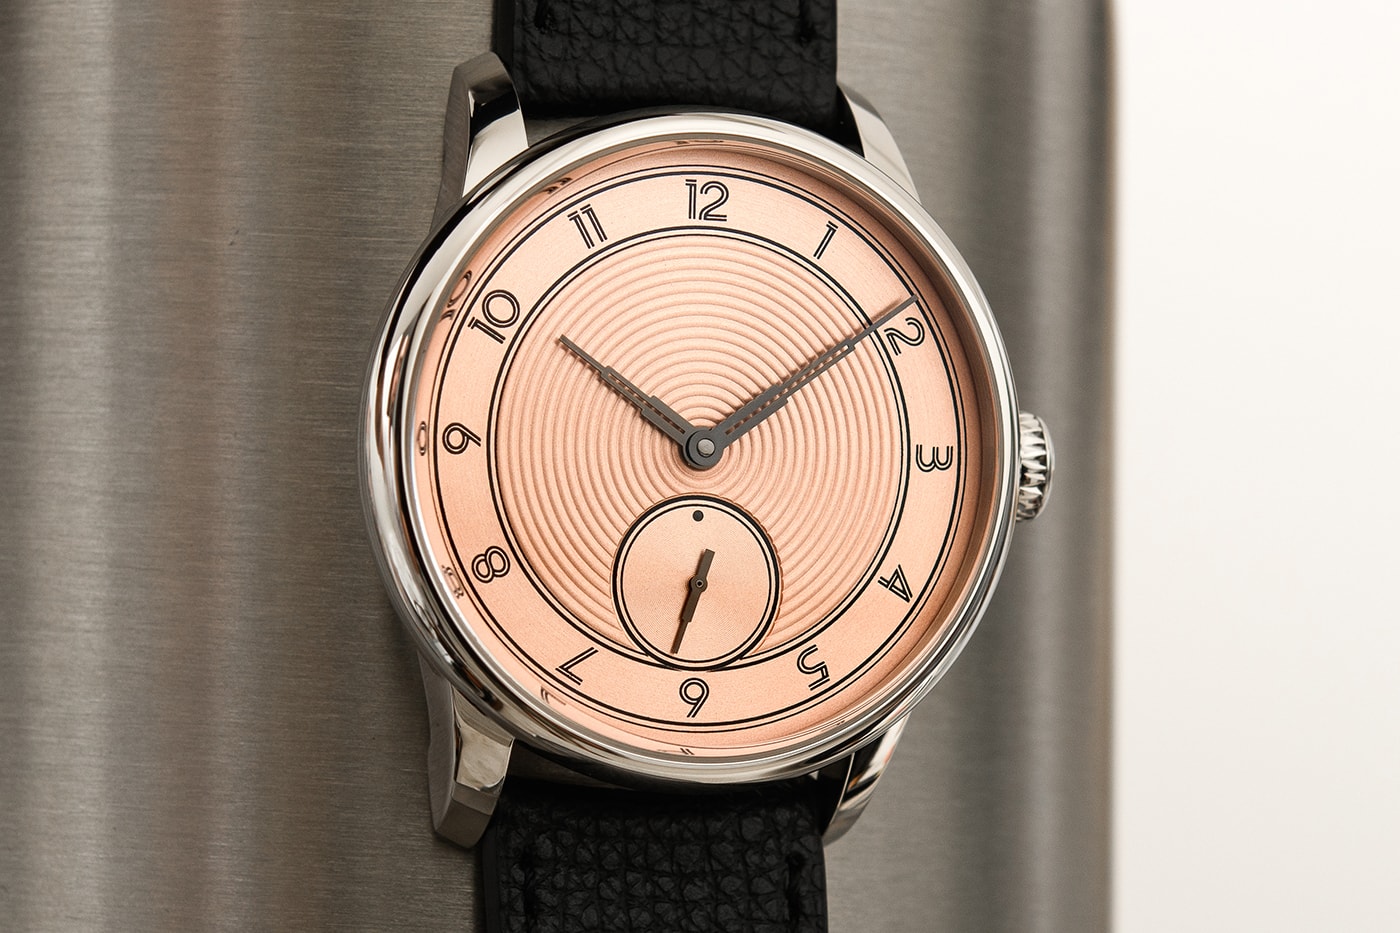 A Guide To Louis Erard Watches